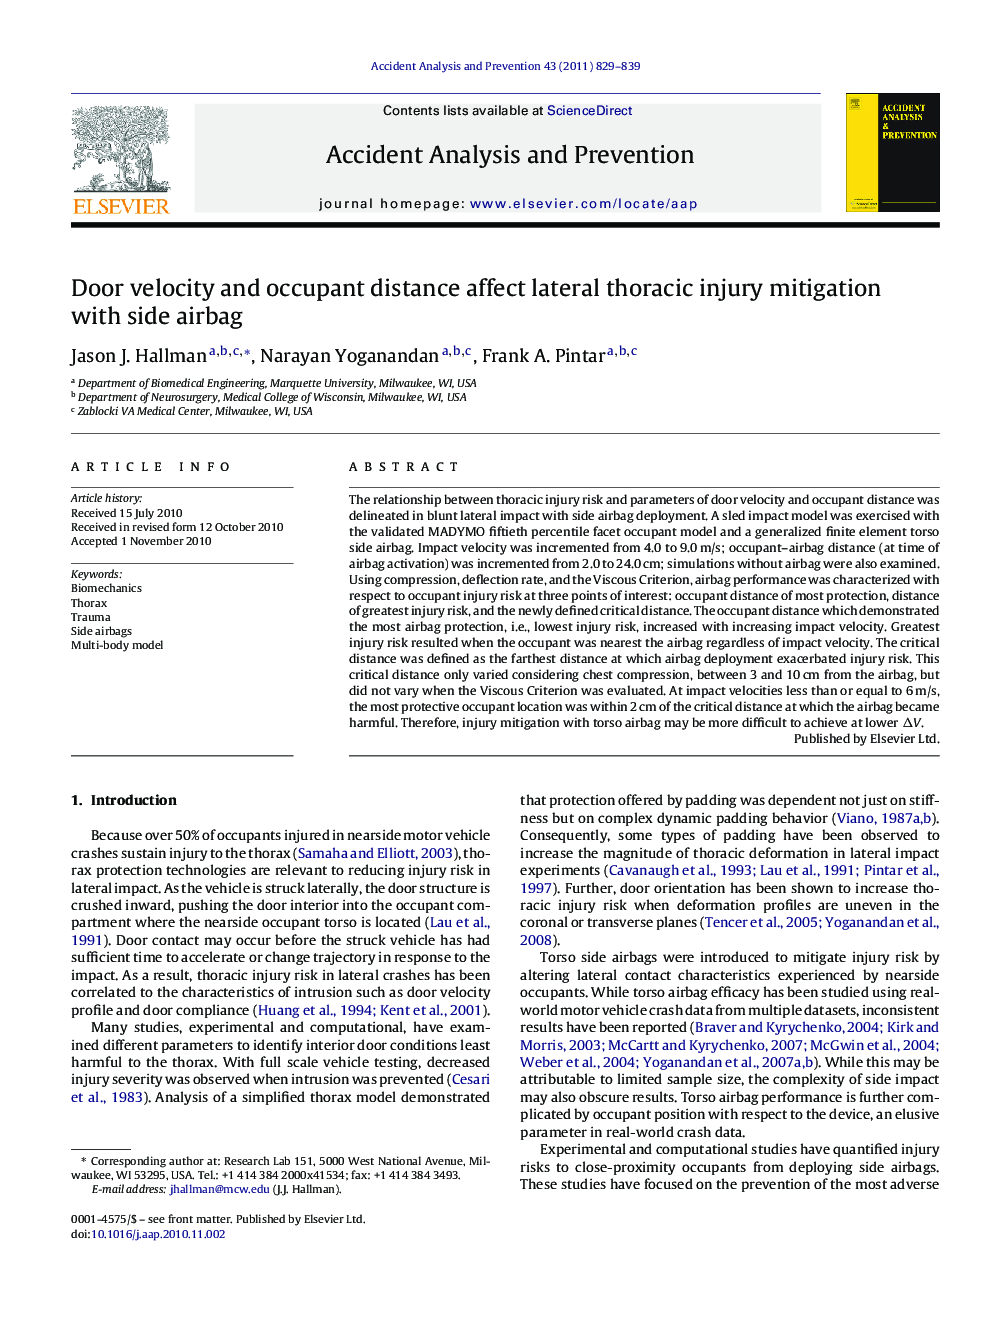 Door velocity and occupant distance affect lateral thoracic injury mitigation with side airbag